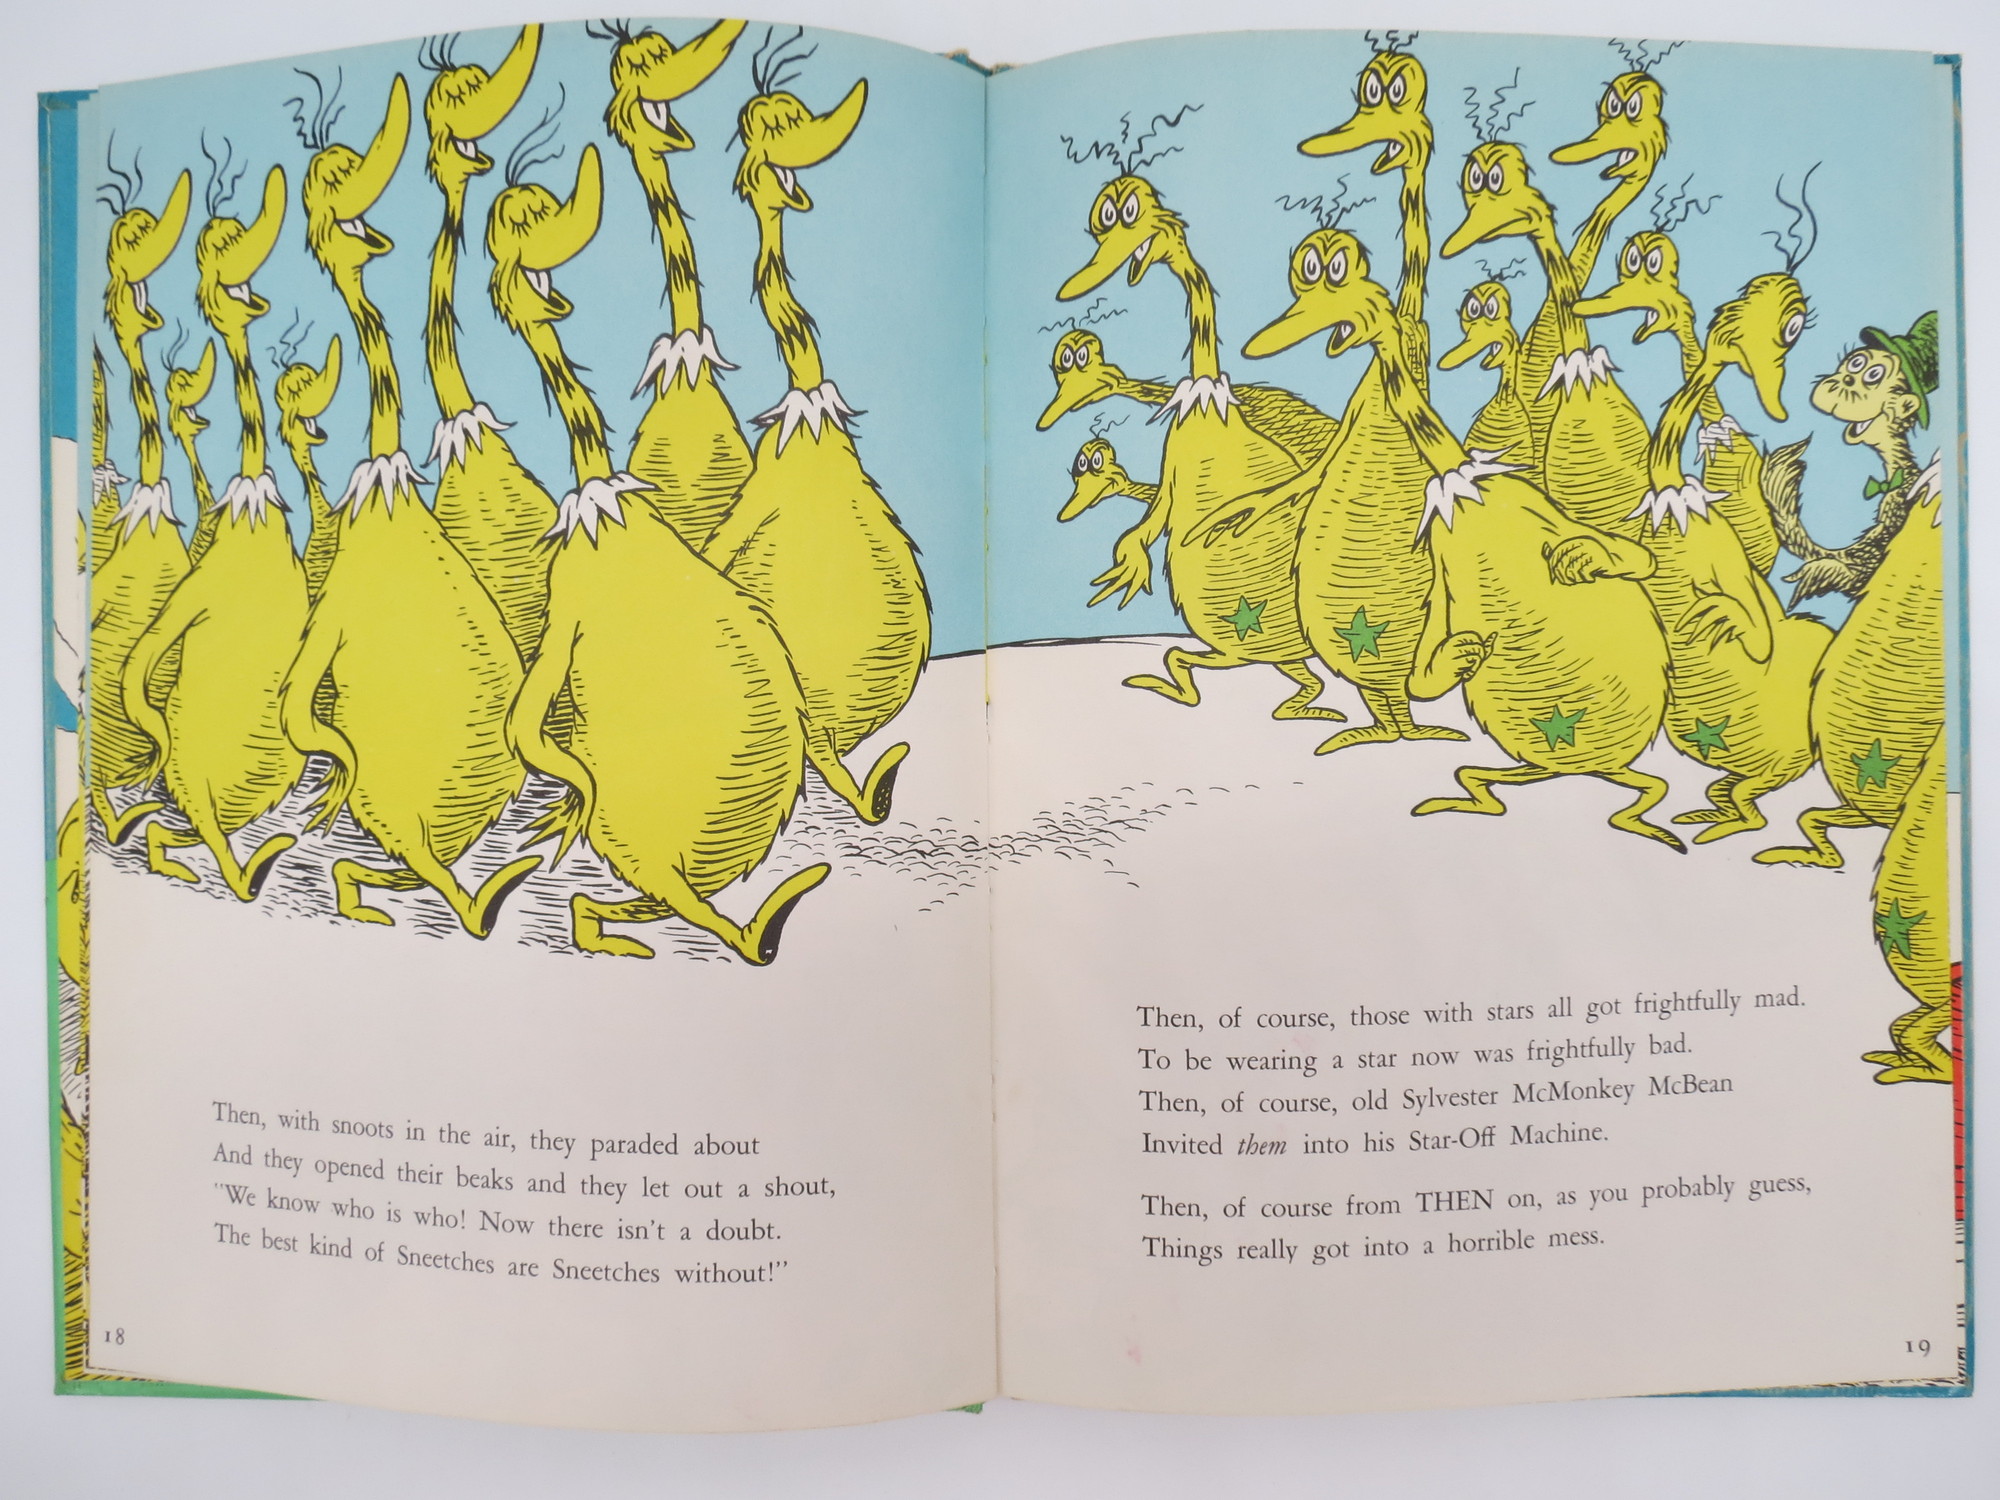 THE SNEETCHES AND OTHER STORIES